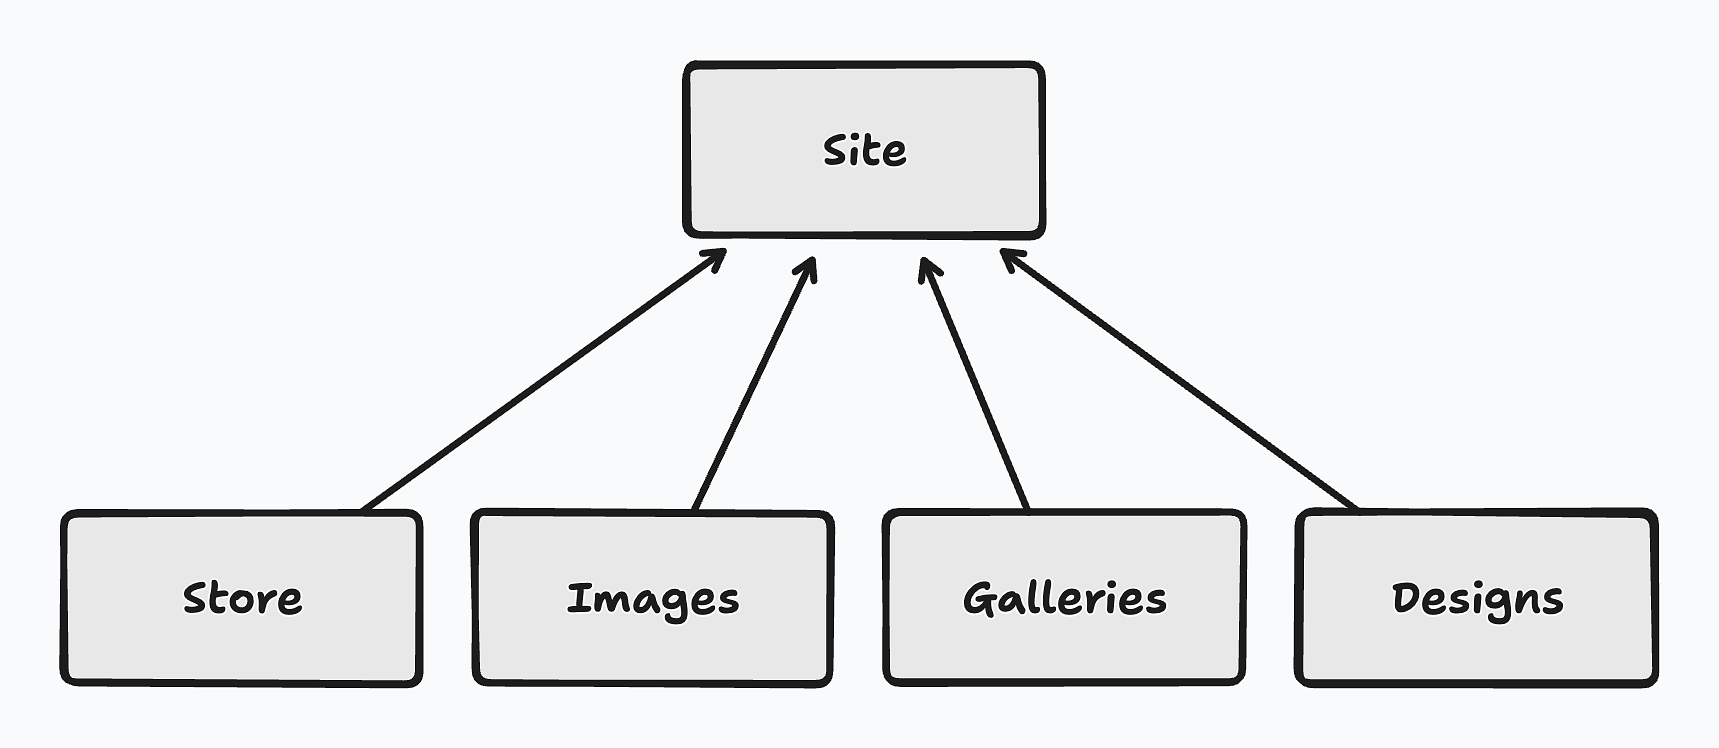 The "Site" model